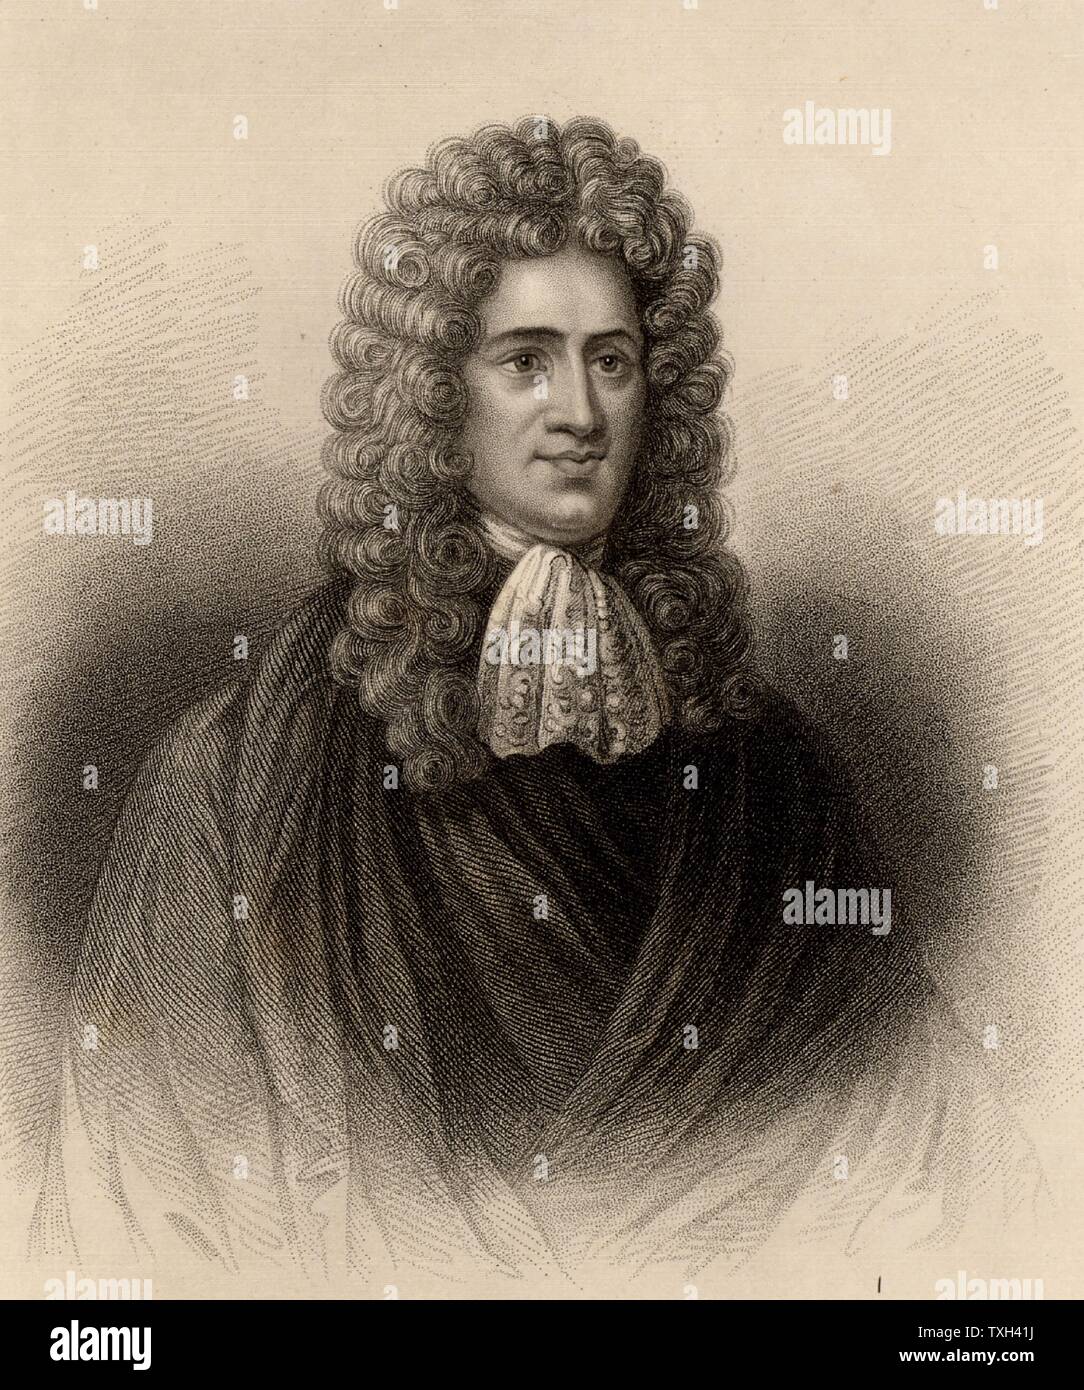 Andrew Fletcher of Saltoun (1653-1716) Scottish writer, politician and patriot.  He opposed the 1707 Act of Union between Scotland and England. Engraving from 'A Biographical Dictionary of Eminent Scotsmen' by Thomas Thomson (1870). Stock Photo